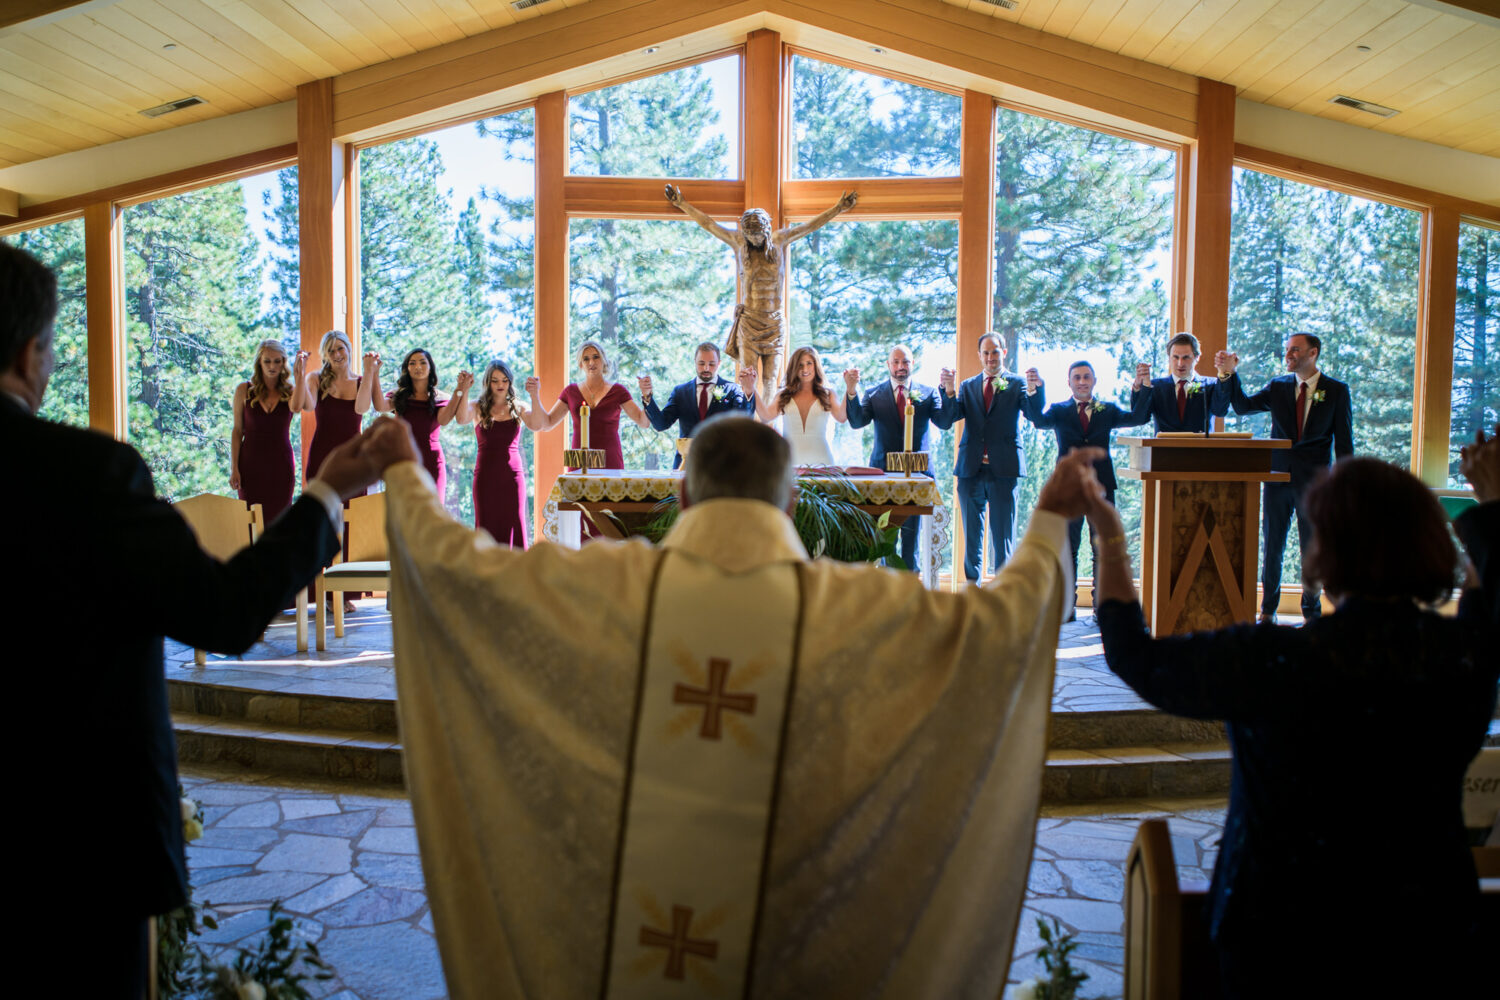 A priest blesses a Catholic wedding at Saint Francis of Assisi church in Incline Village.